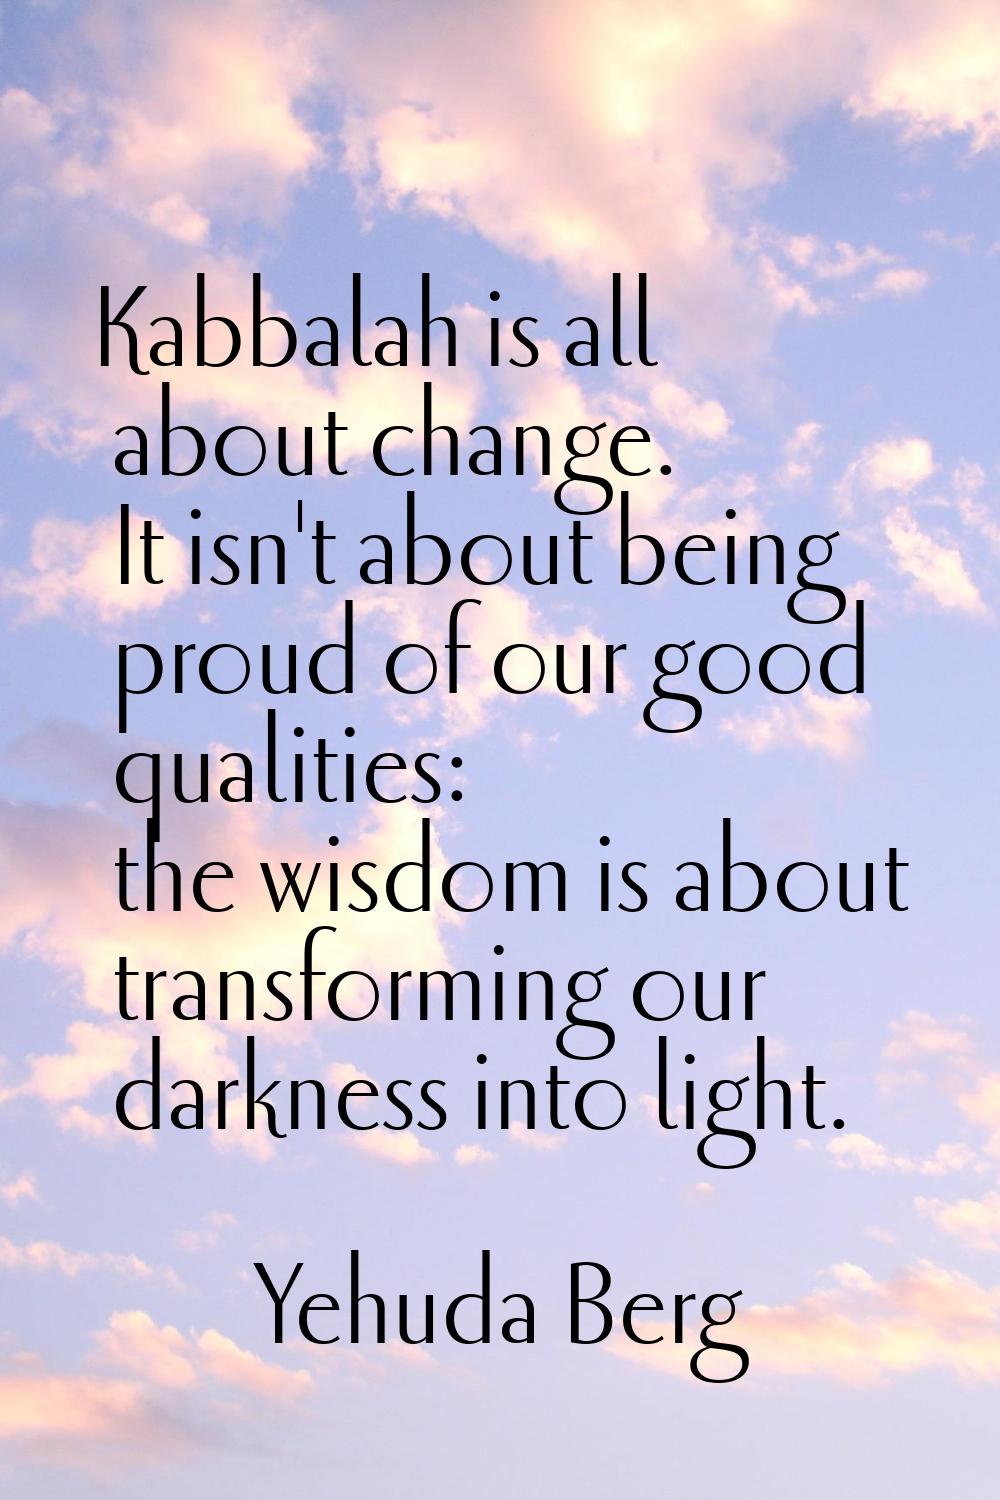 Kabbalah is all about change. It isn't about being proud of our good qualities: the wisdom is about